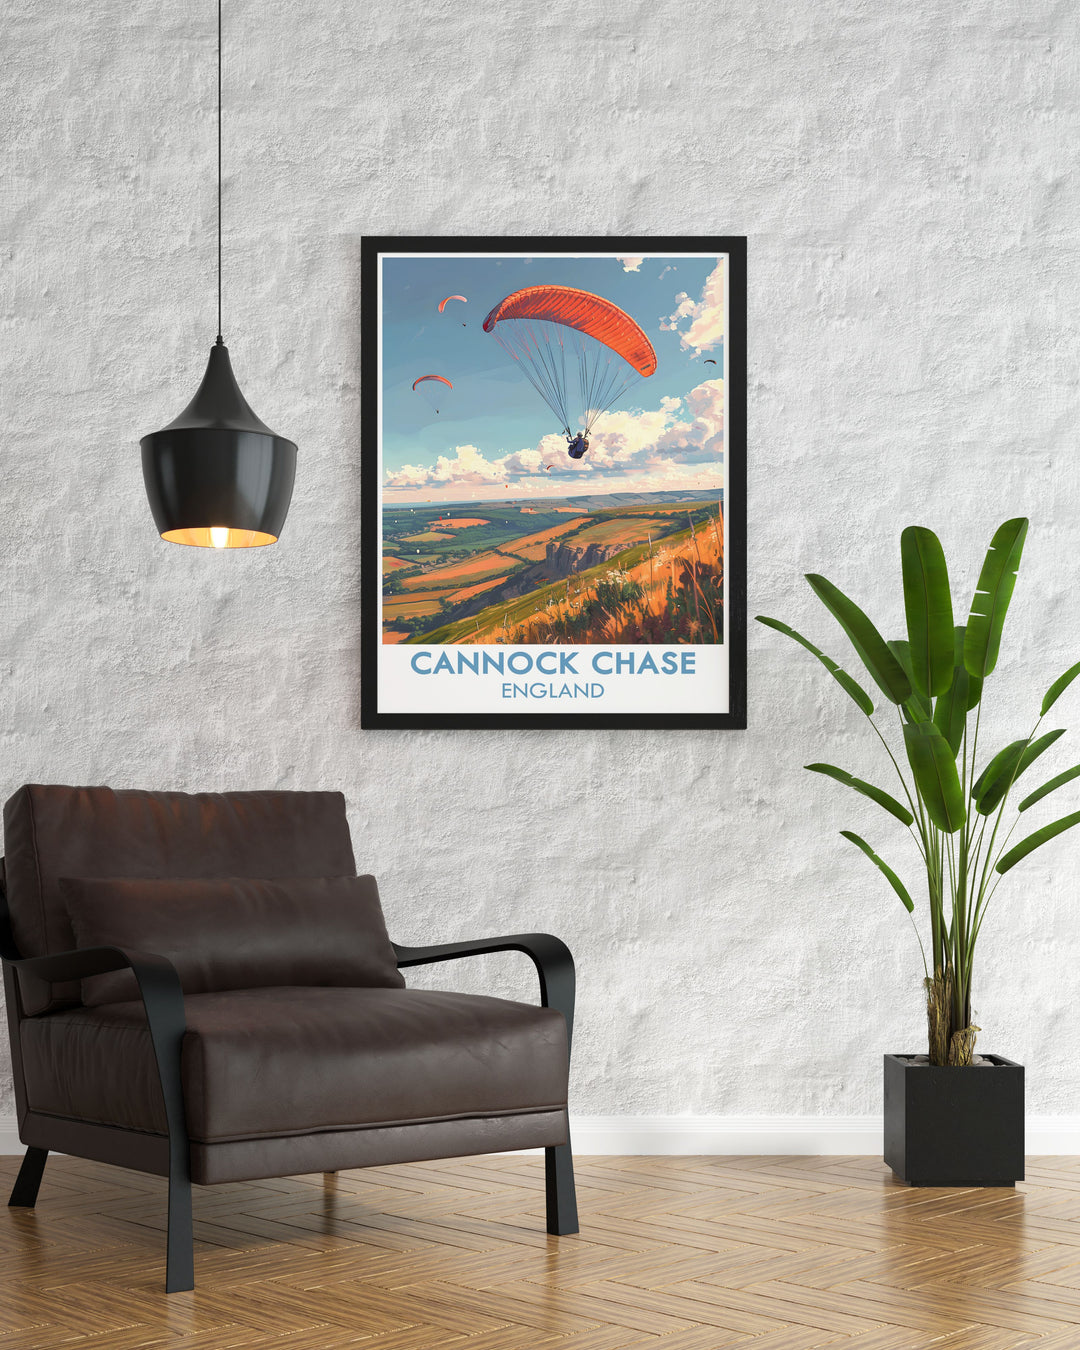 Celebrate the beauty of The Chase with this exquisite Cannock Chase art print. This piece highlights the tranquil paths and lush woodlands of Staffordshire, making it a perfect addition to your English countryside decor collection.